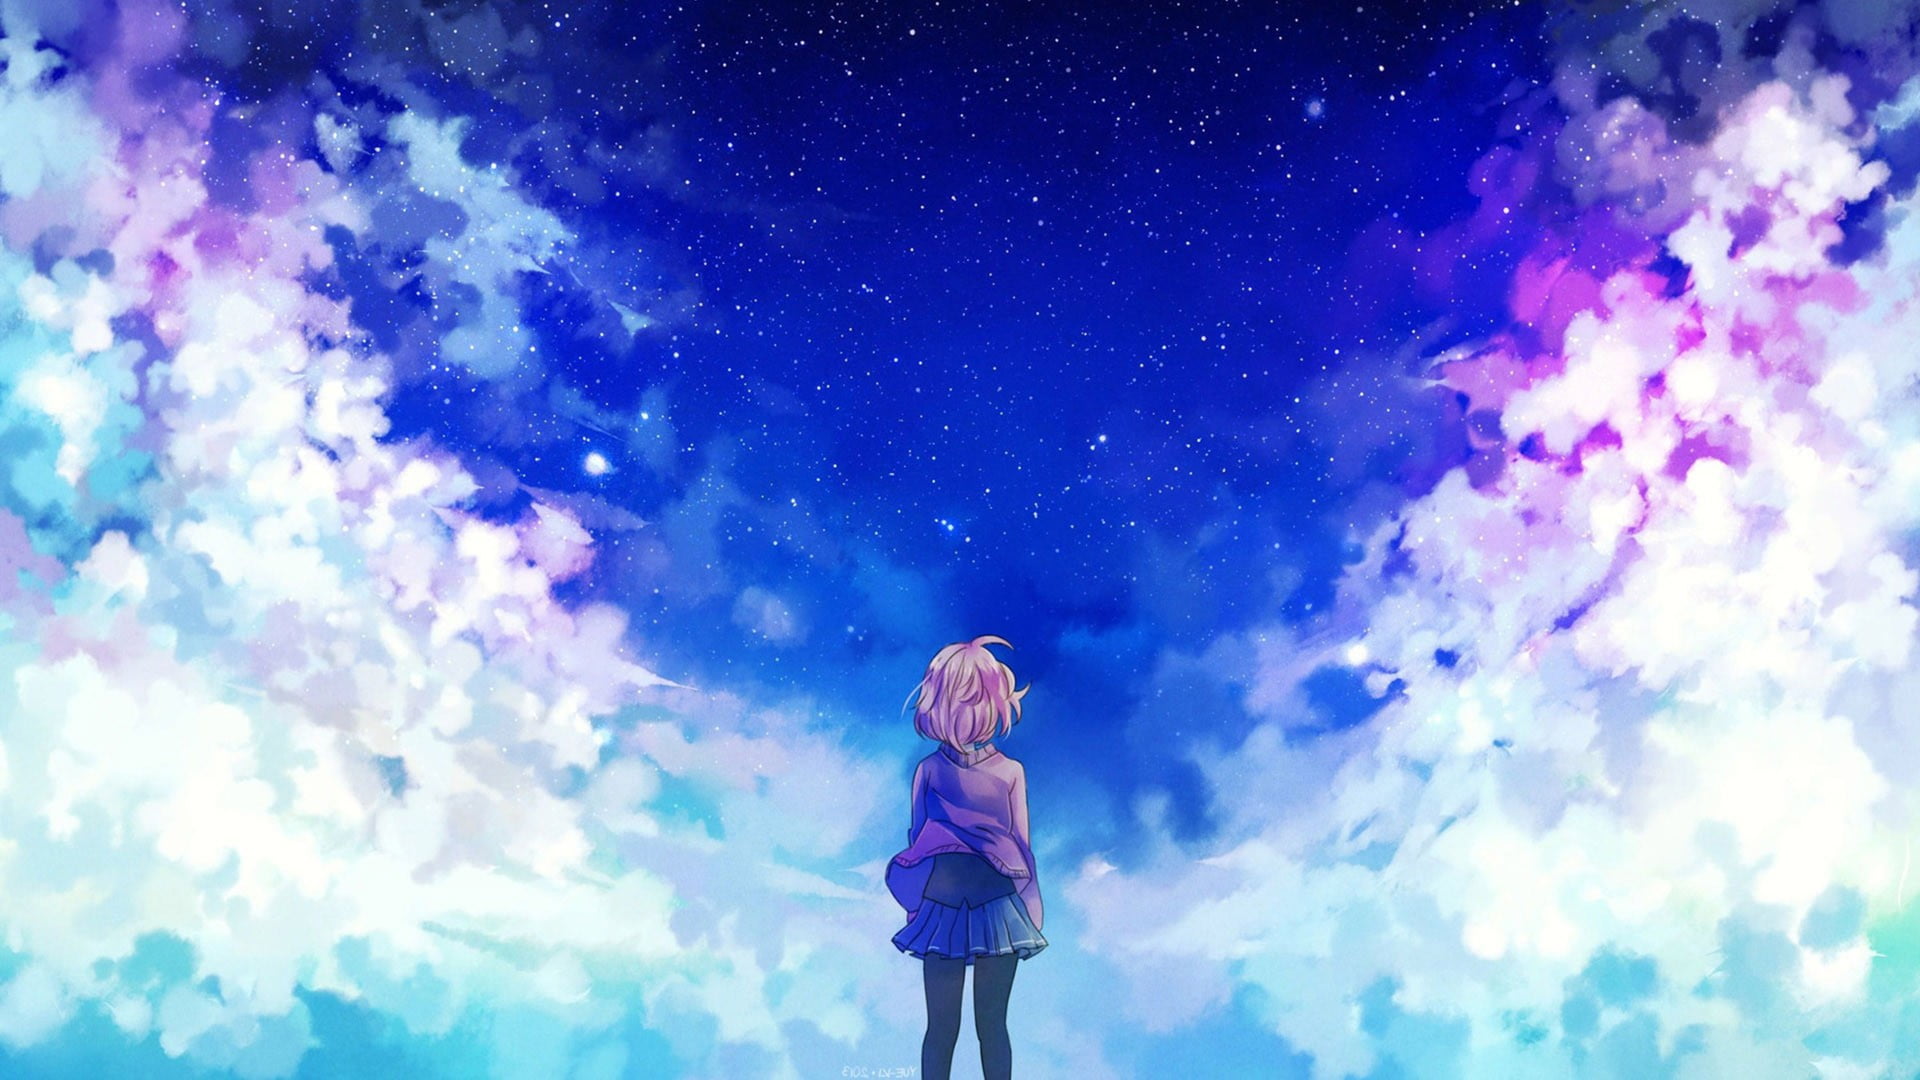 Beyond The Boundary Background - HD Wallpaper 